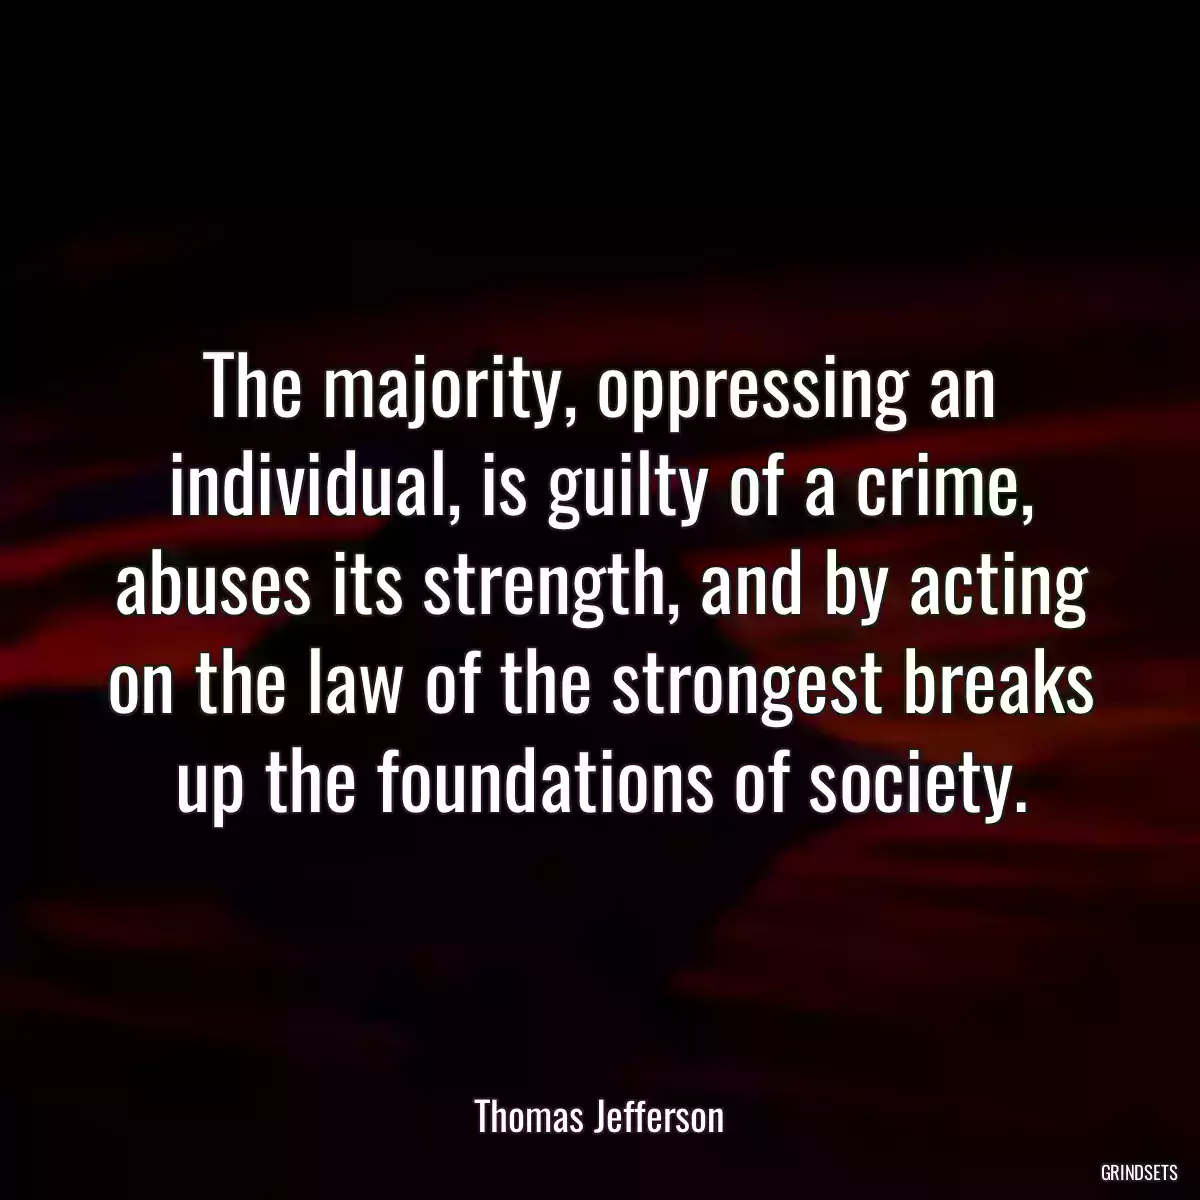 The majority, oppressing an individual, is guilty of a crime, abuses its strength, and by acting on the law of the strongest breaks up the foundations of society.